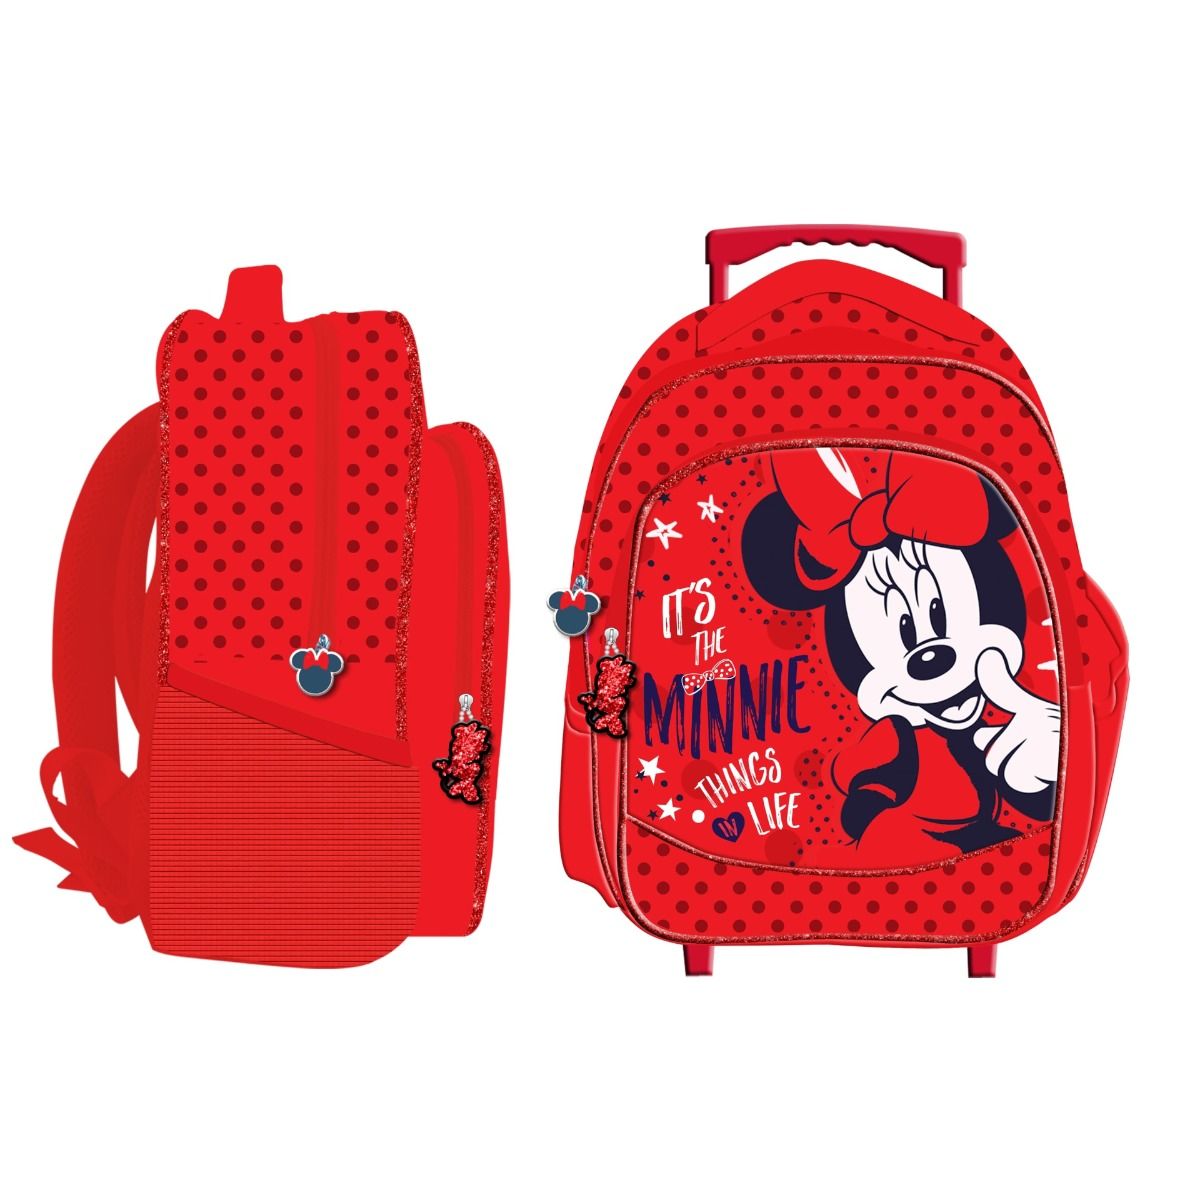 TROLLEY ASILO MINNIE DELUXE